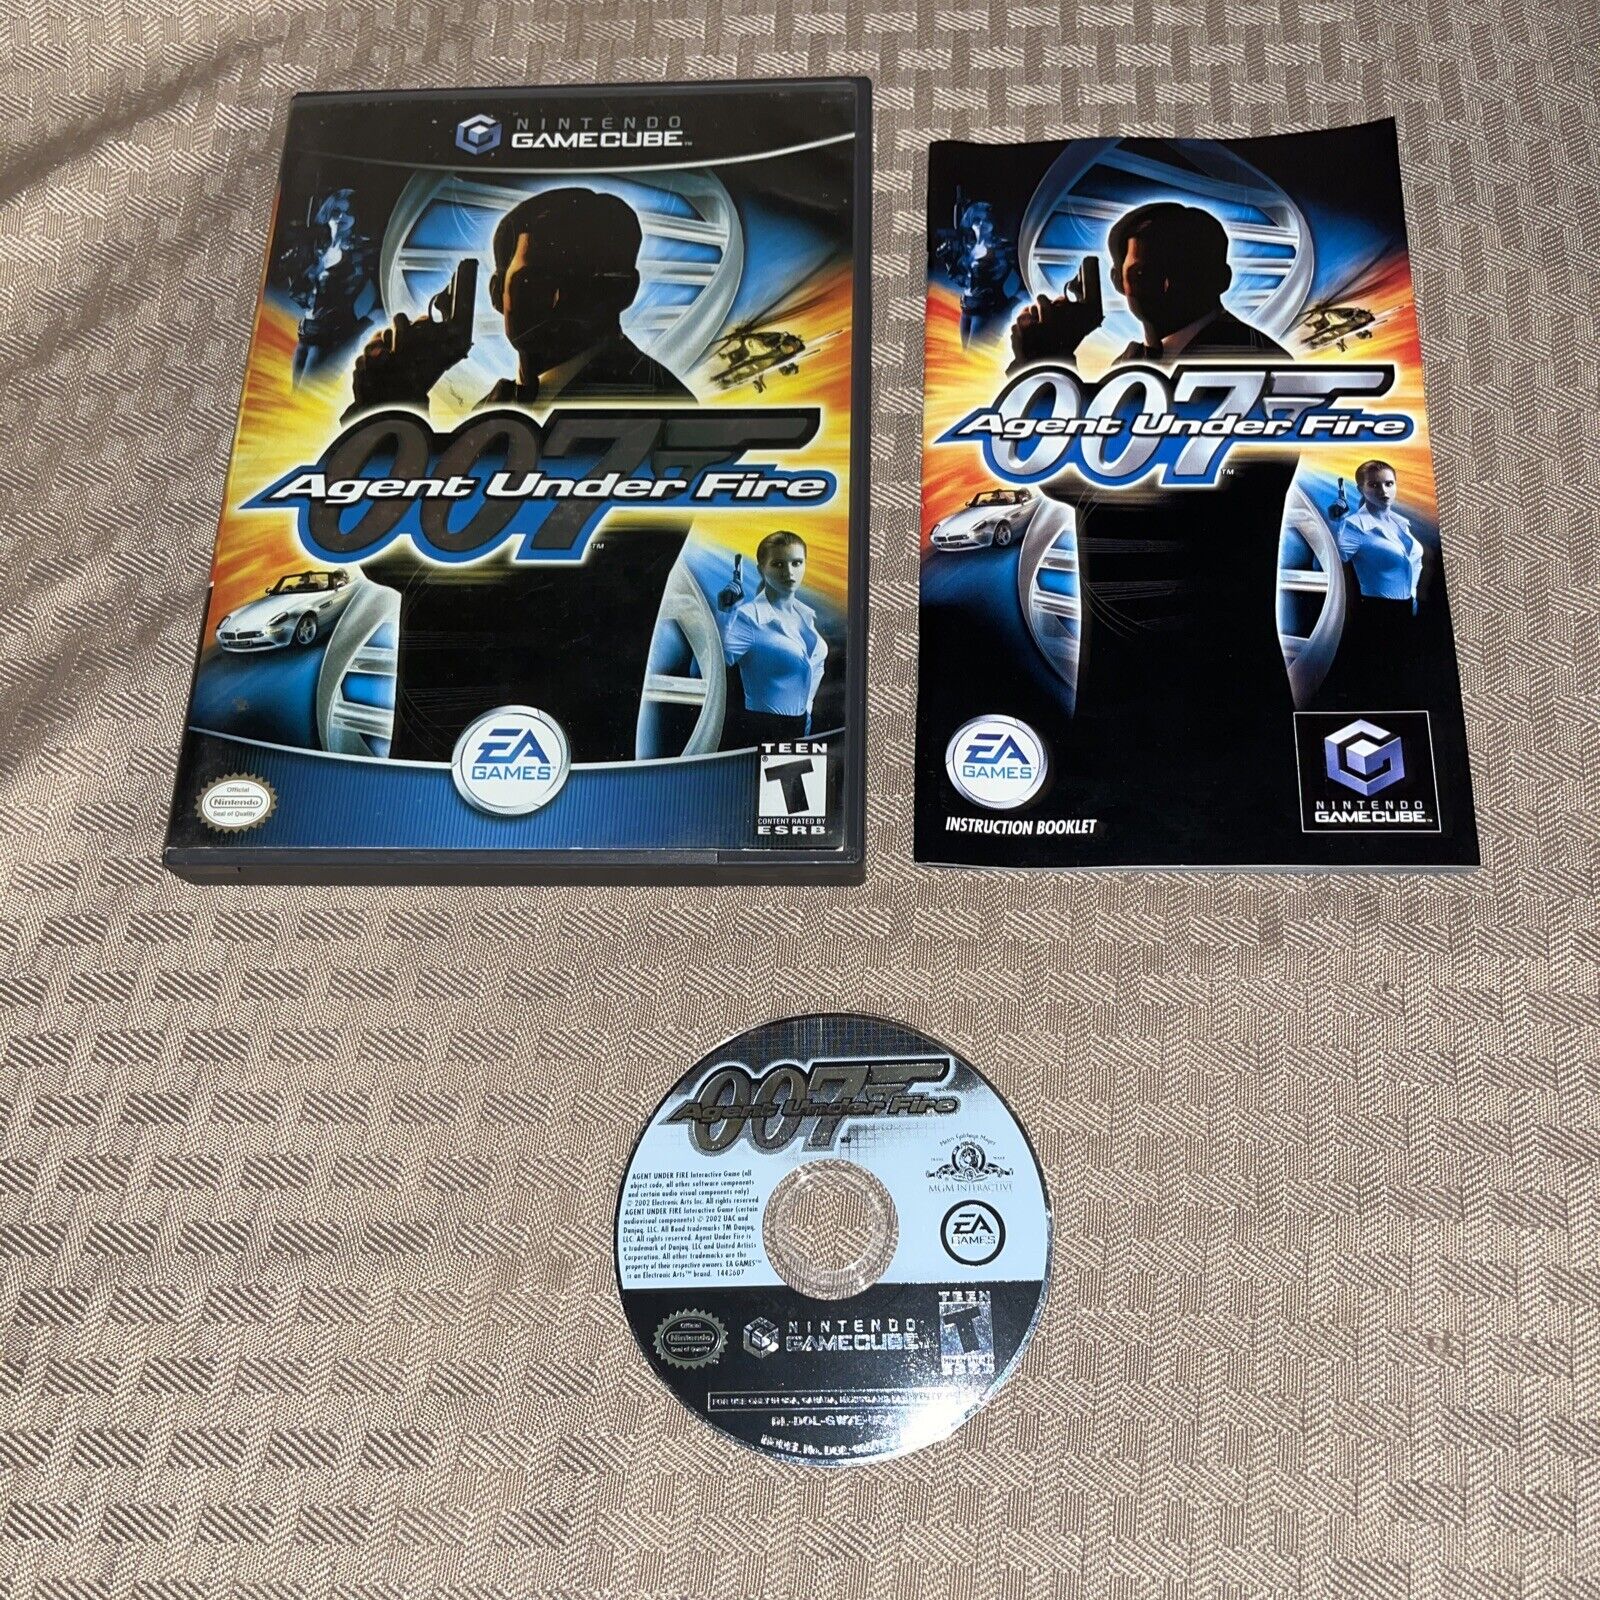 Gamecube - 007 Agent Under Fire - Used